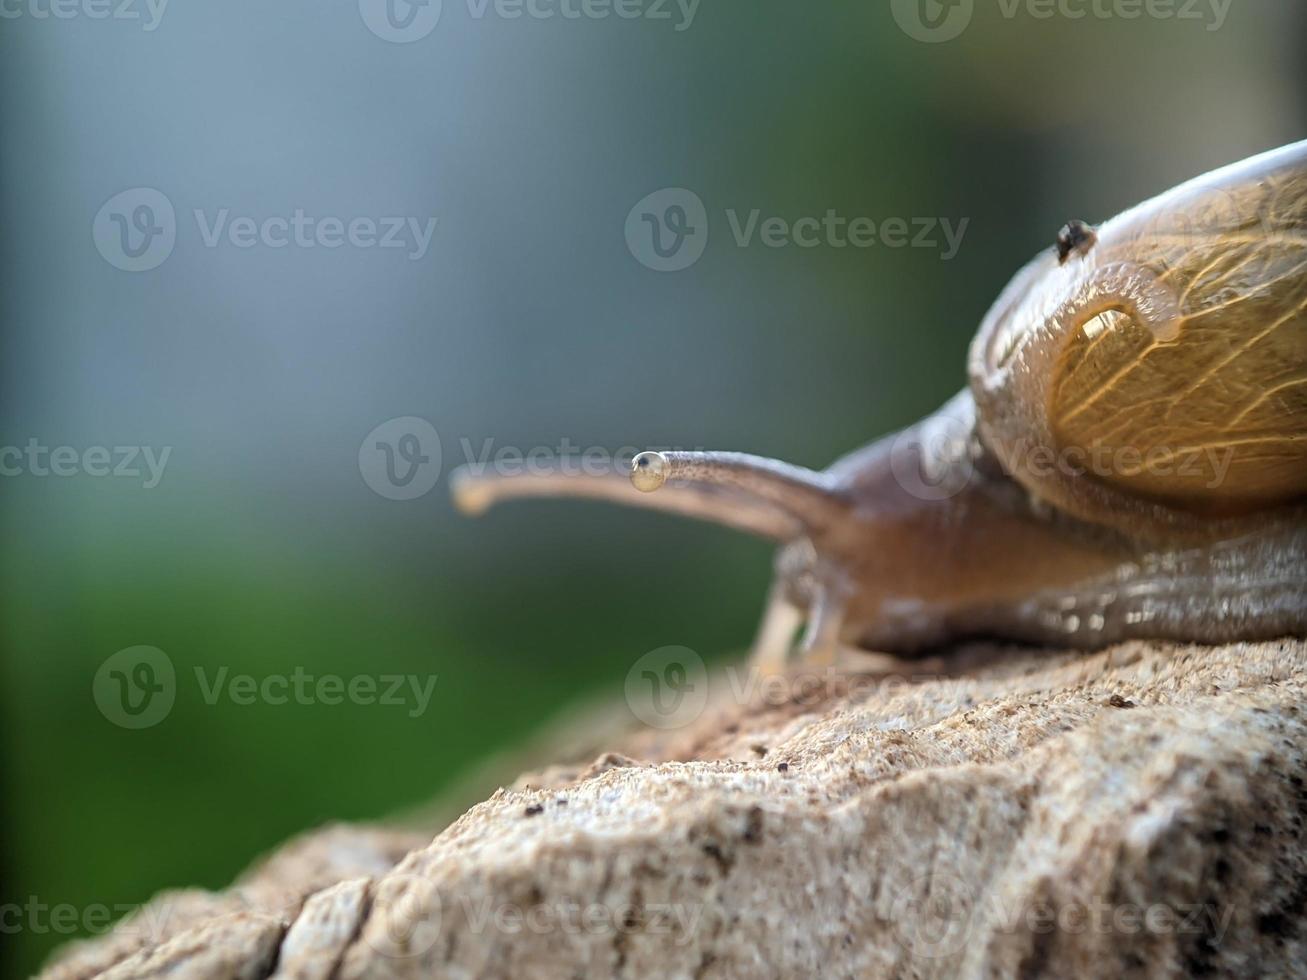 Snail on the wood, in the morning, macro photography, extreme close up photo